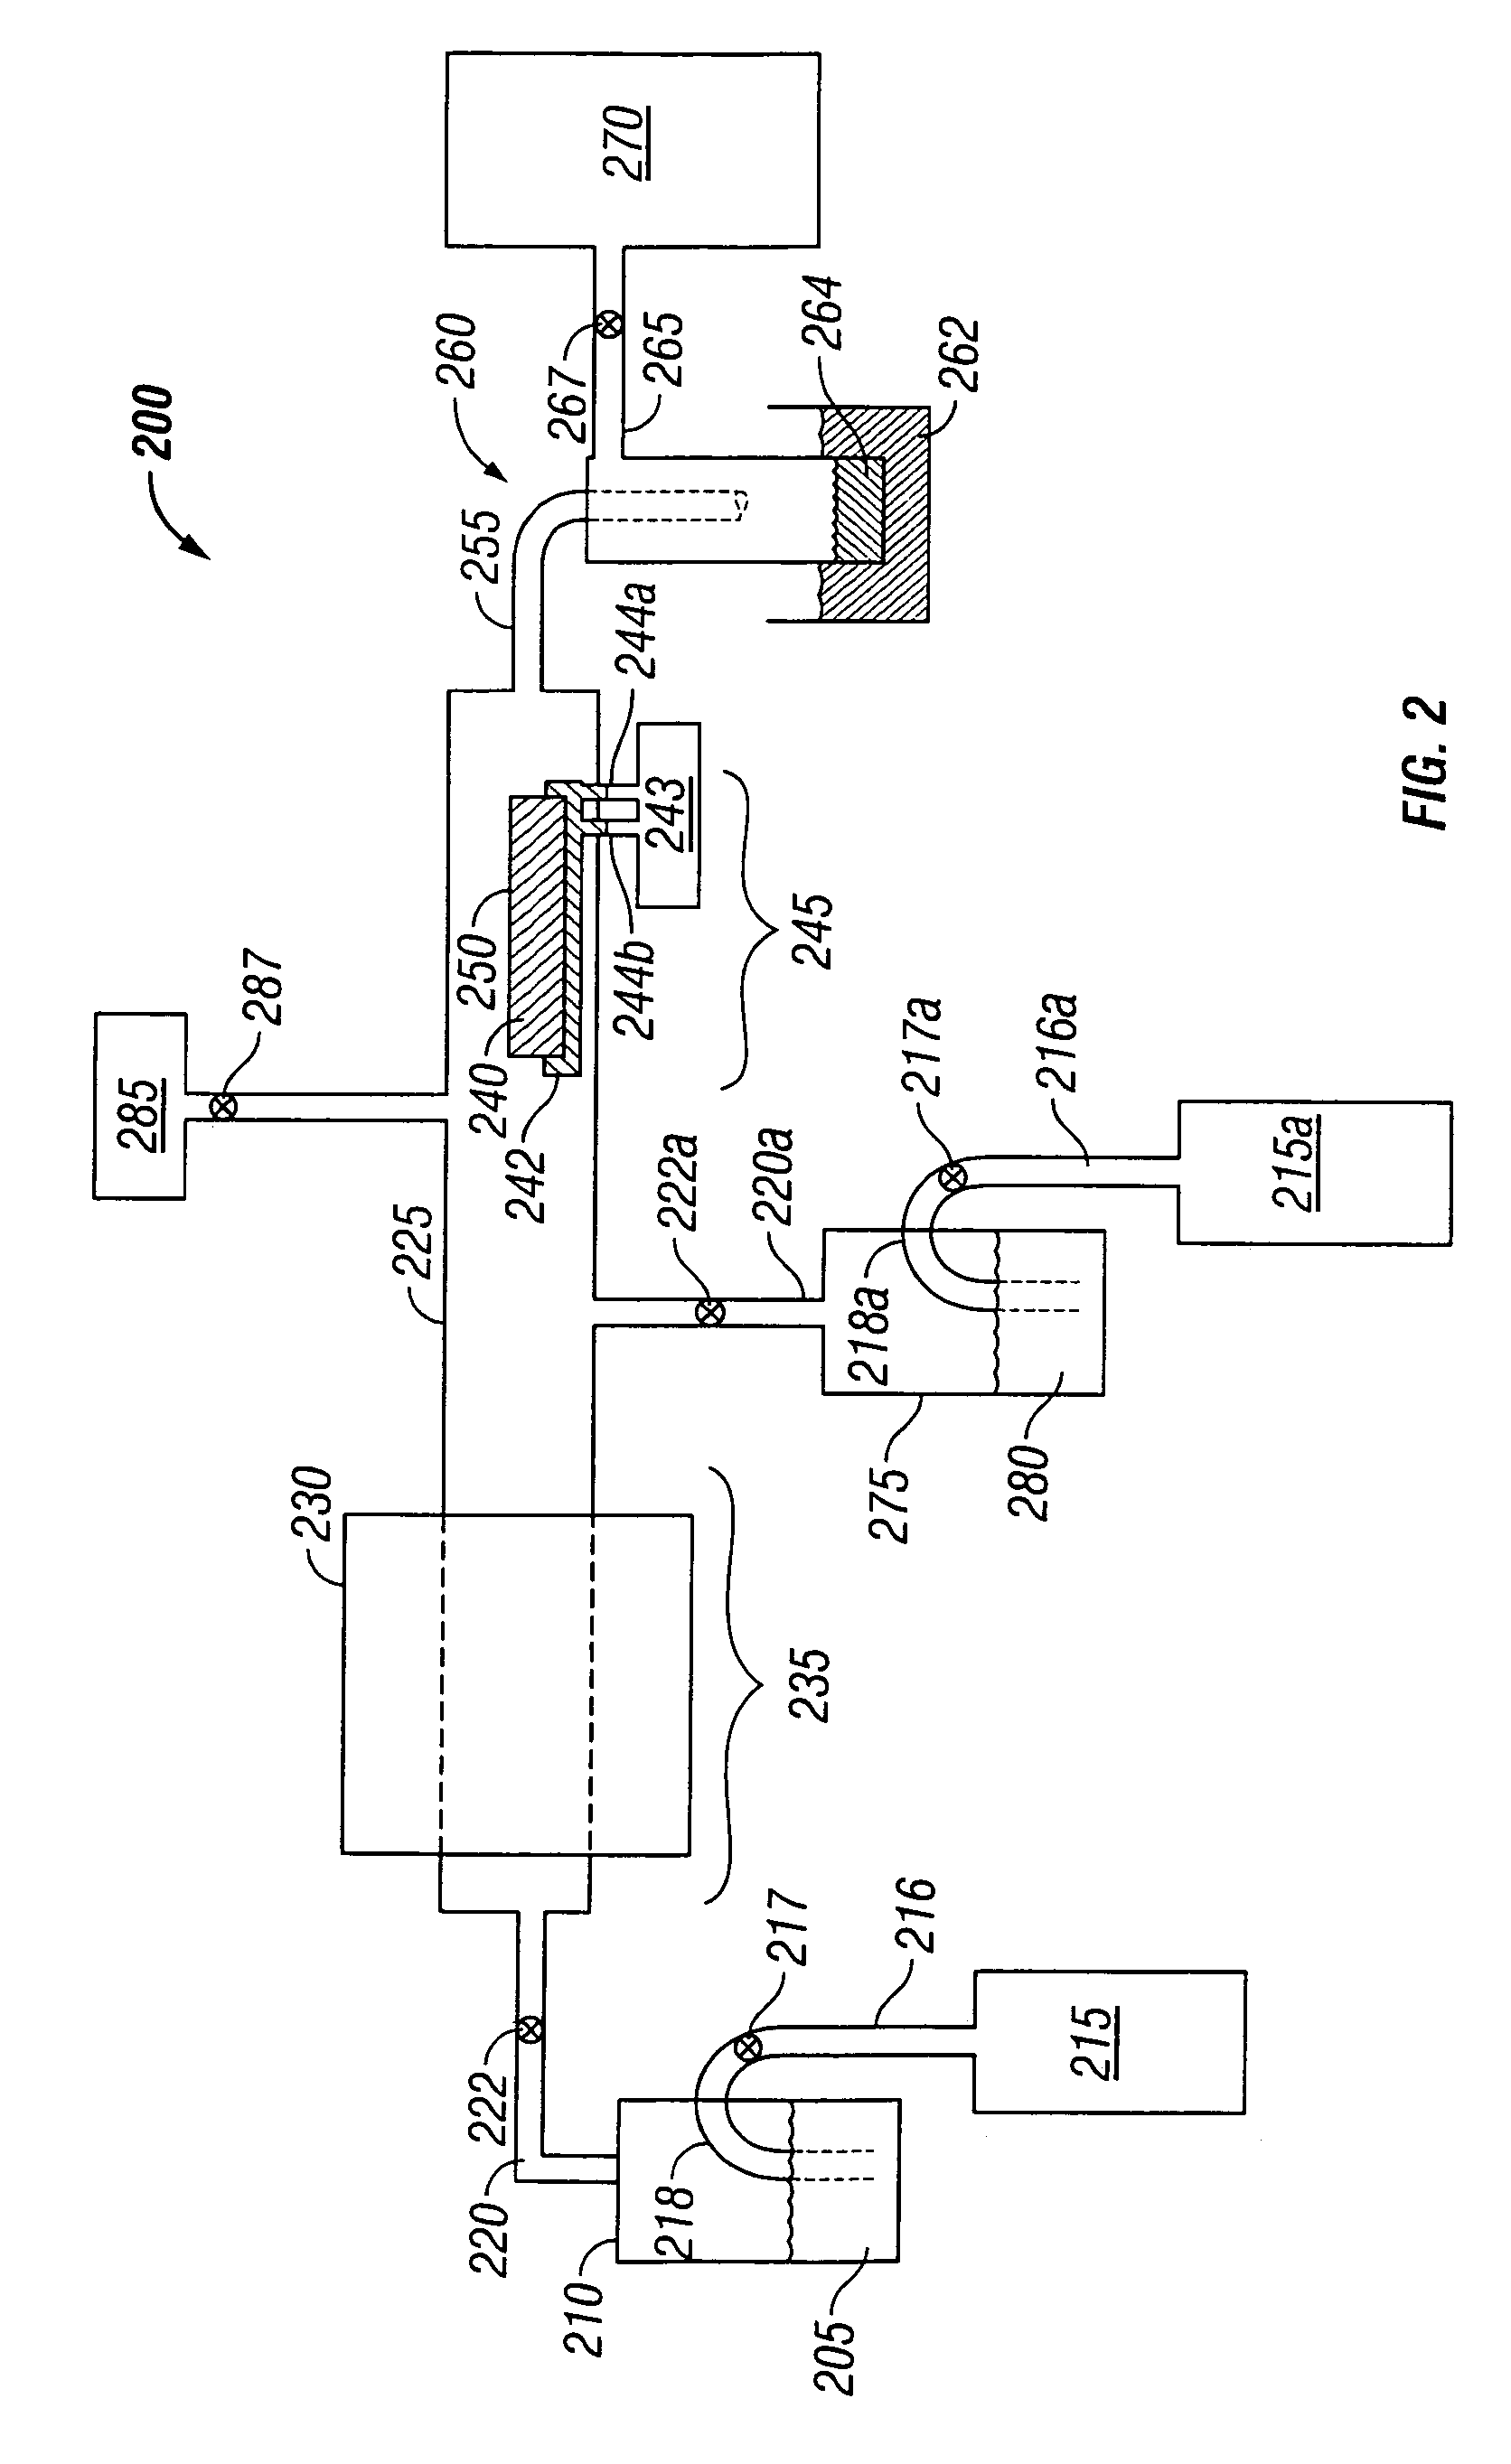 Apparatus, precursors and deposition methods for silicon-containing materials